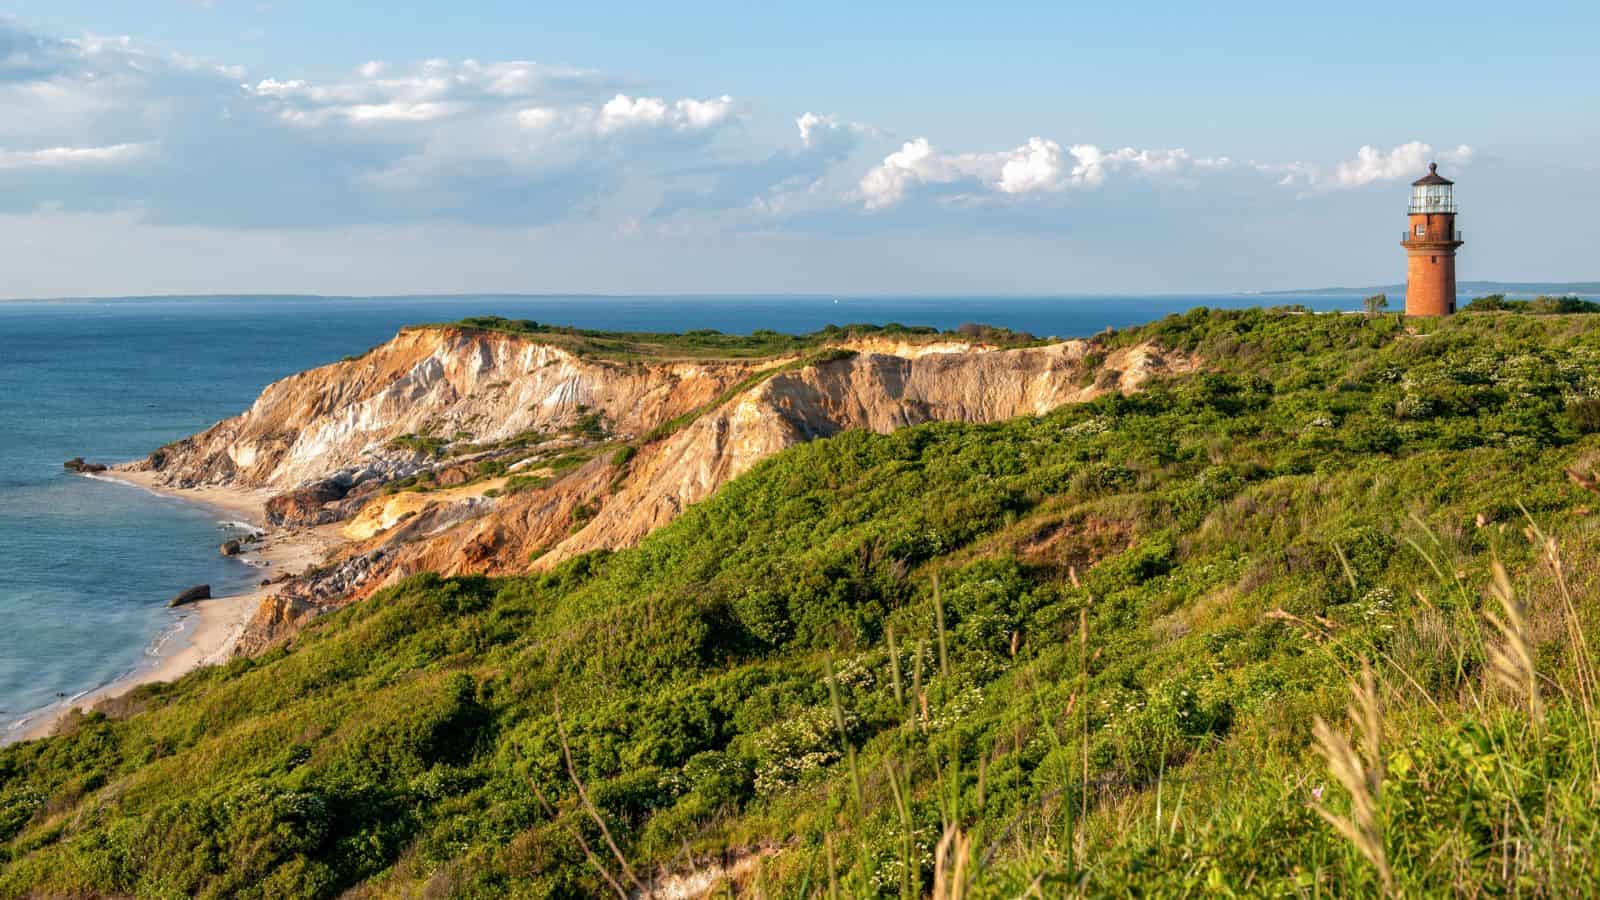 <p>Is Martha’s Vineyard worth the hype? We think so. Edgartown, one of the island’s most popular towns, has long attracted everyone from young families looking for classic New England prep to A-list celebrities with extravagant vacation homes.</p><p>Even if you’re staying somewhere less touristy on the island, like Chilmark, Edgartown should be visited at least once for its enchanting boutiques and elegant seafood spots.</p>